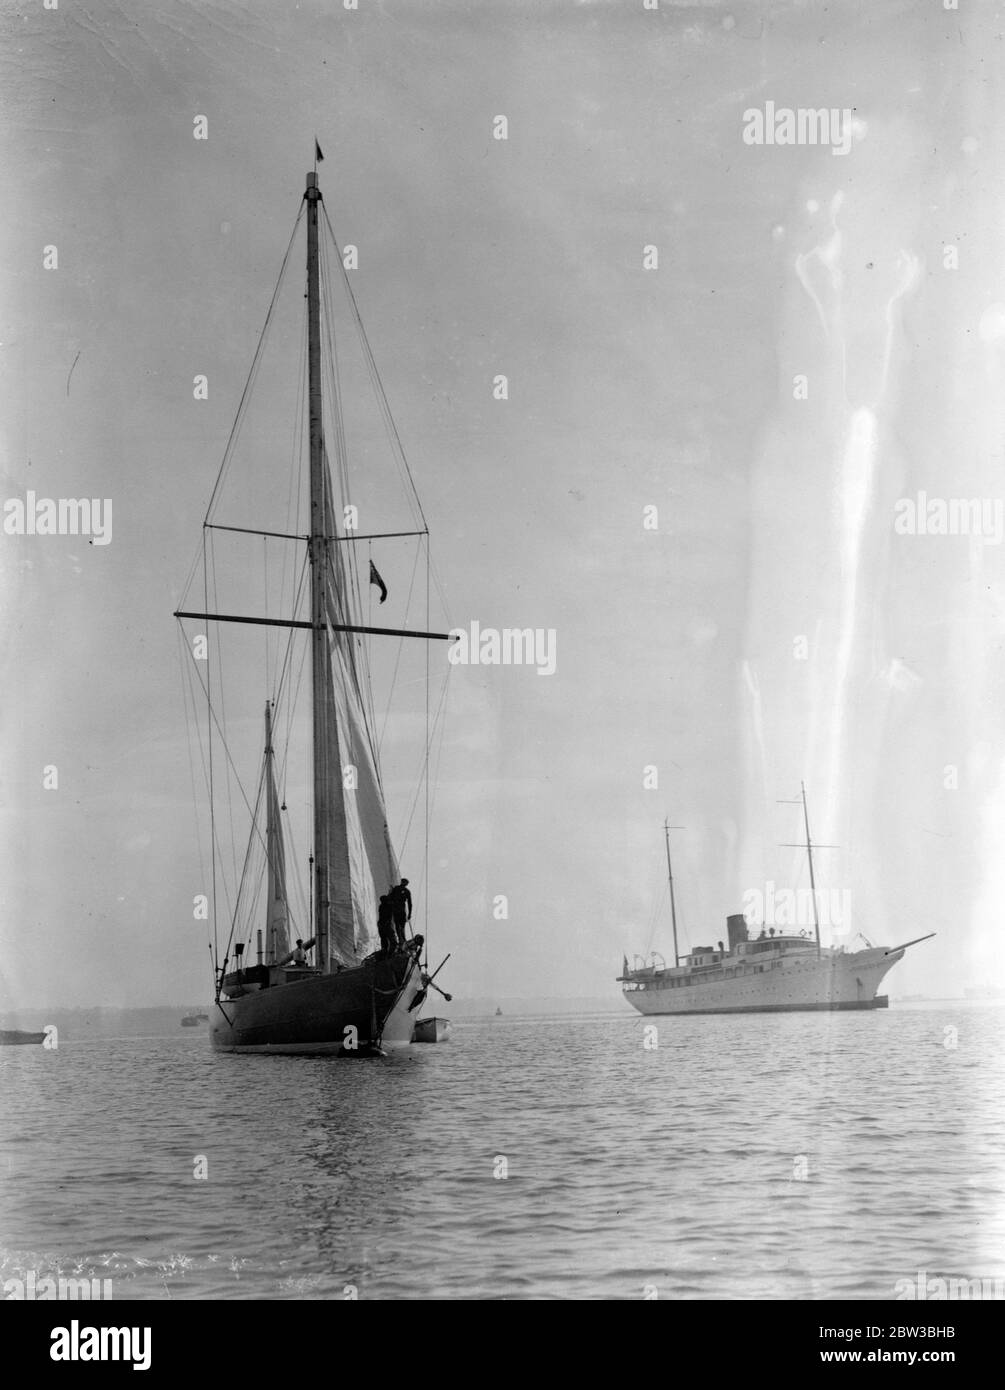 Endeavour is a 130 foot , J-class yacht built for the 1934 America 's Cup by Camper and Nicholson in Gosport . Here it is arriving in Southampton , Hampshire , England. October 1934 Stock Photo